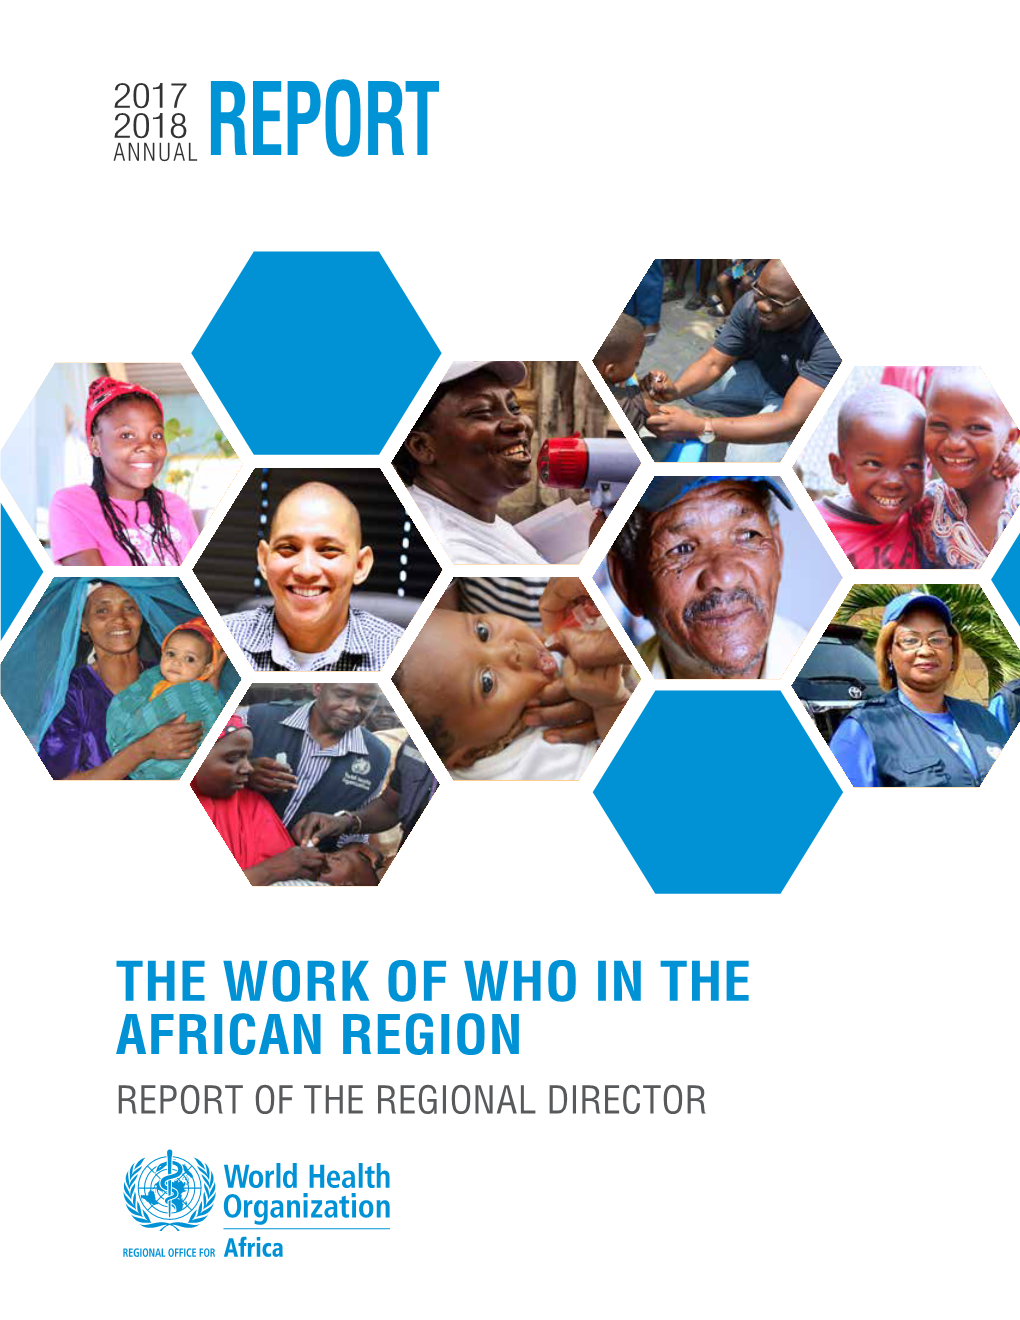 REPORT of the REGIONAL DIRECTOR the Work of WHO in the African Region - Report of the Regional Director: 2017-2018